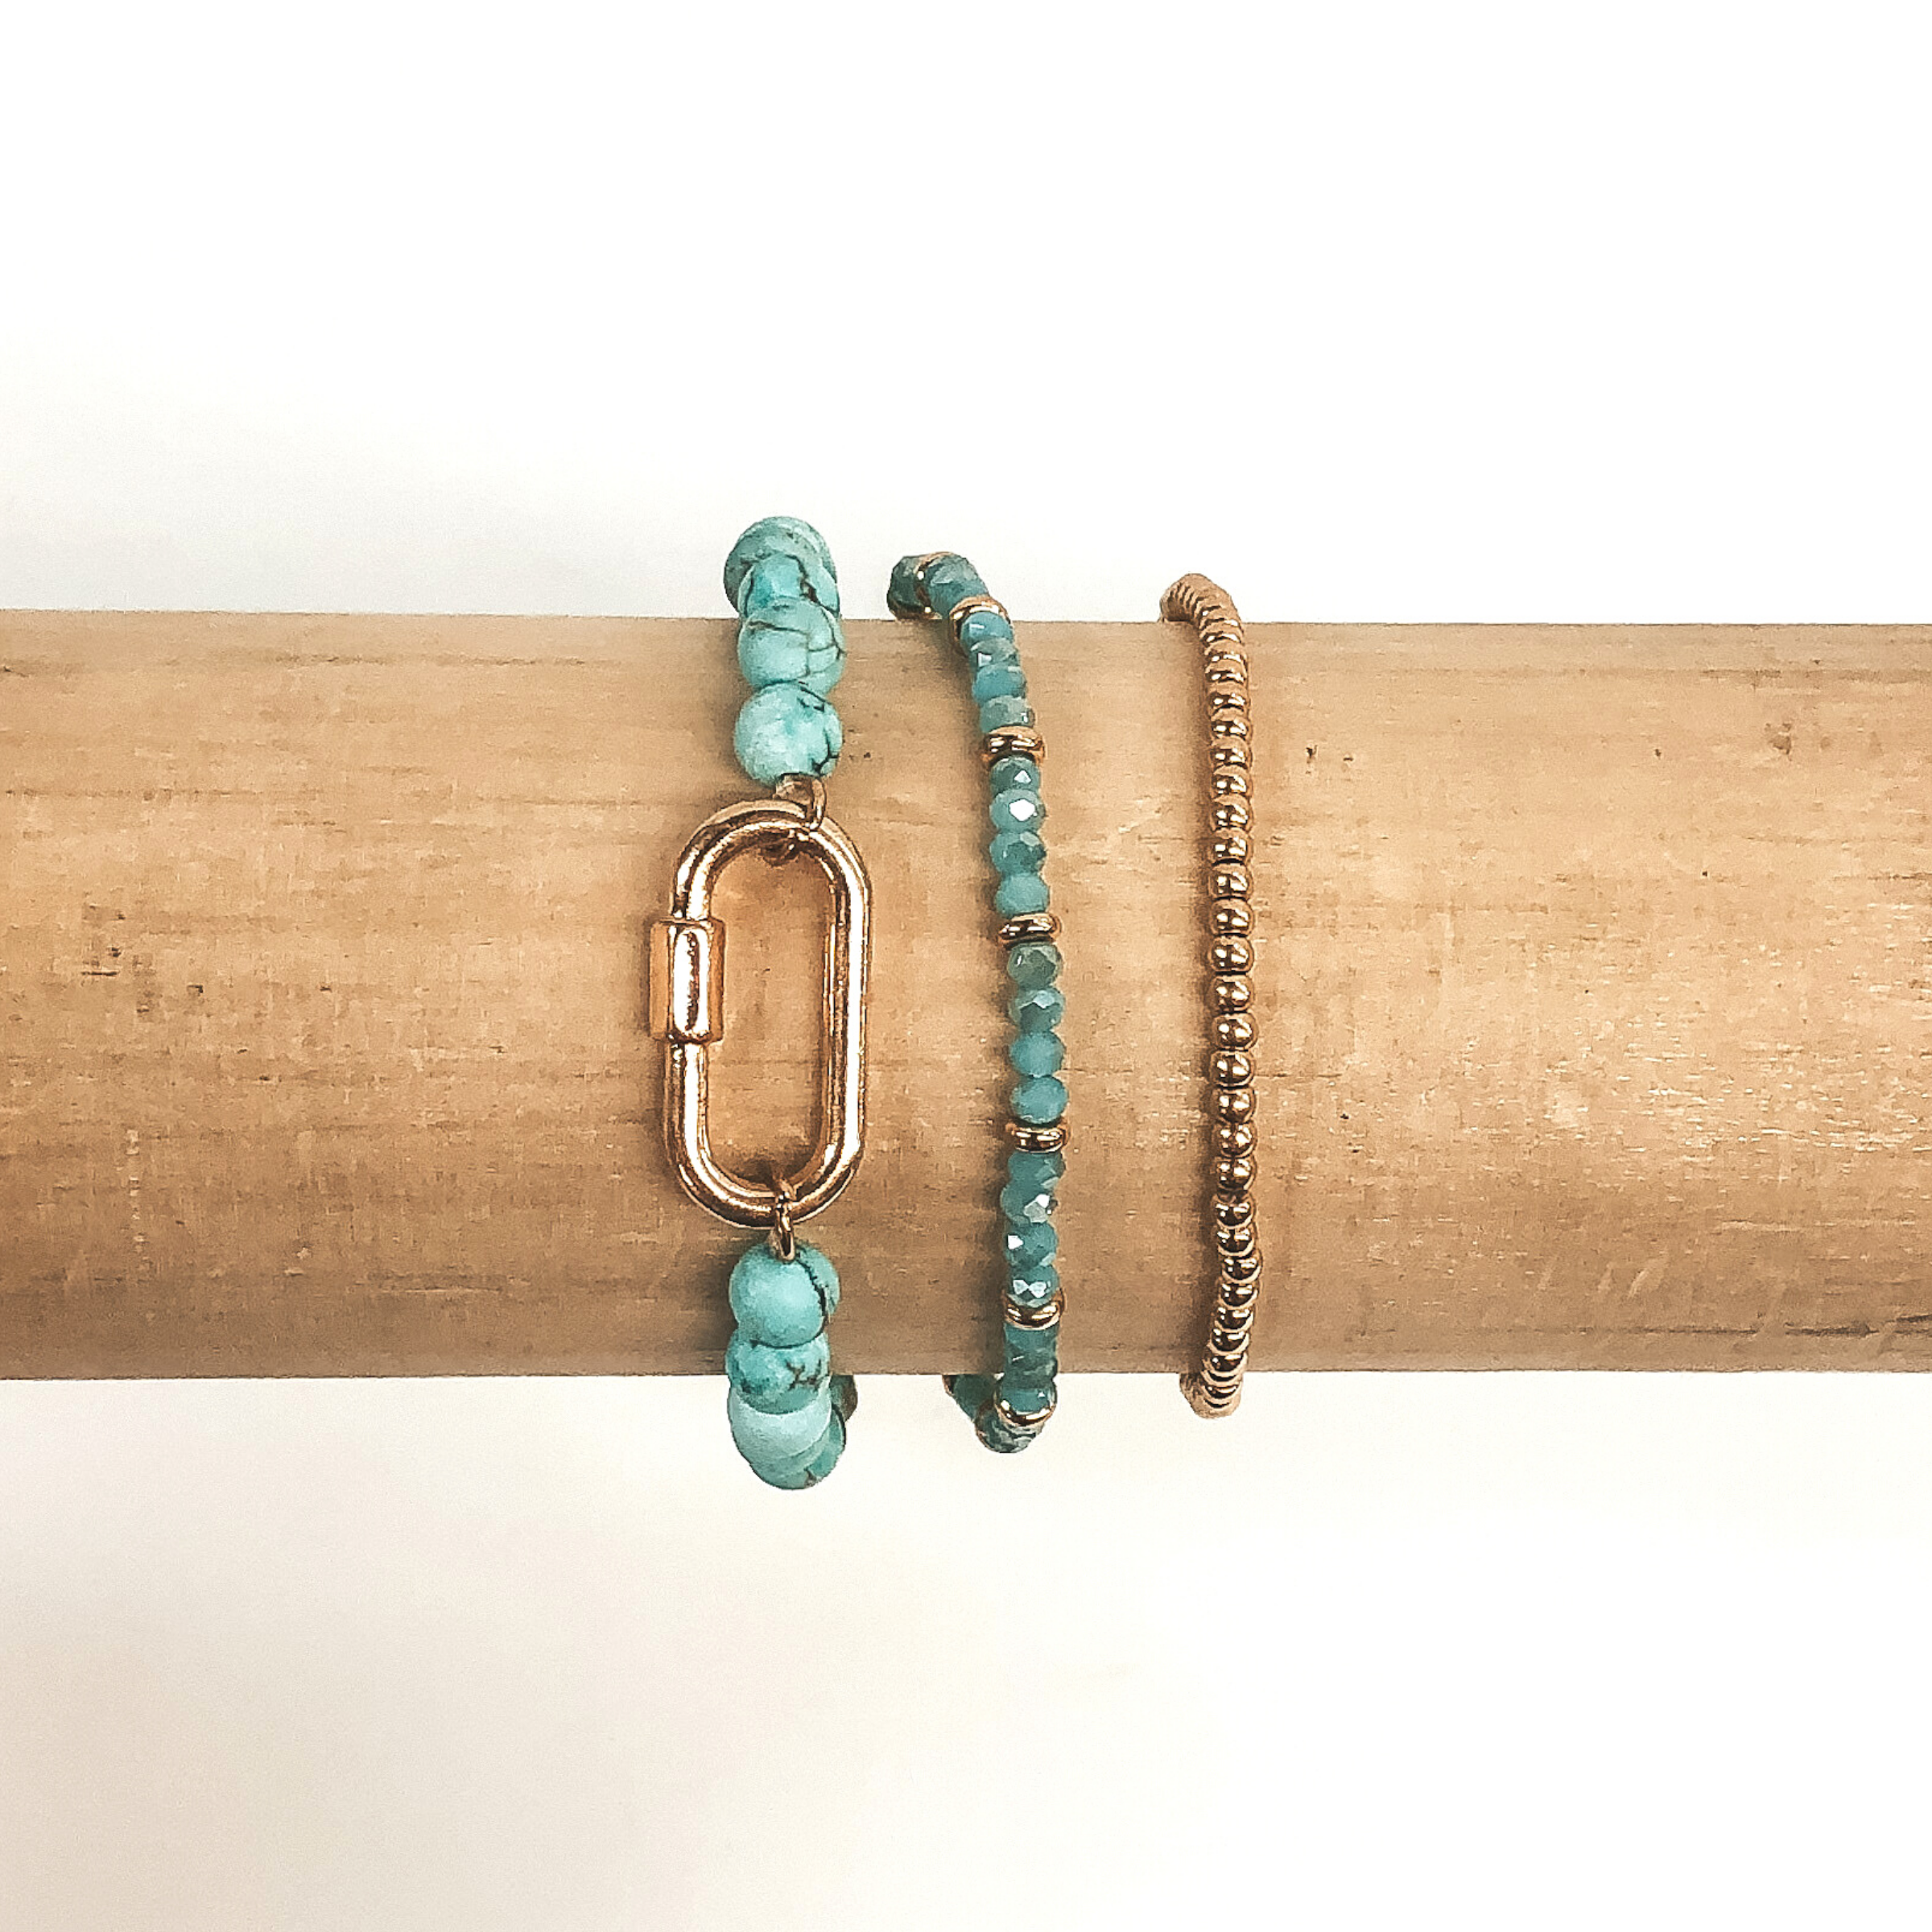 One bracelet is all gold beads, one bracelet has dark teal beads and gold spacer beads, and the last bracelet has teal marble beads with an oval pendant. These bracelets are pictured on a wood colored bracelet holder on a white background. 